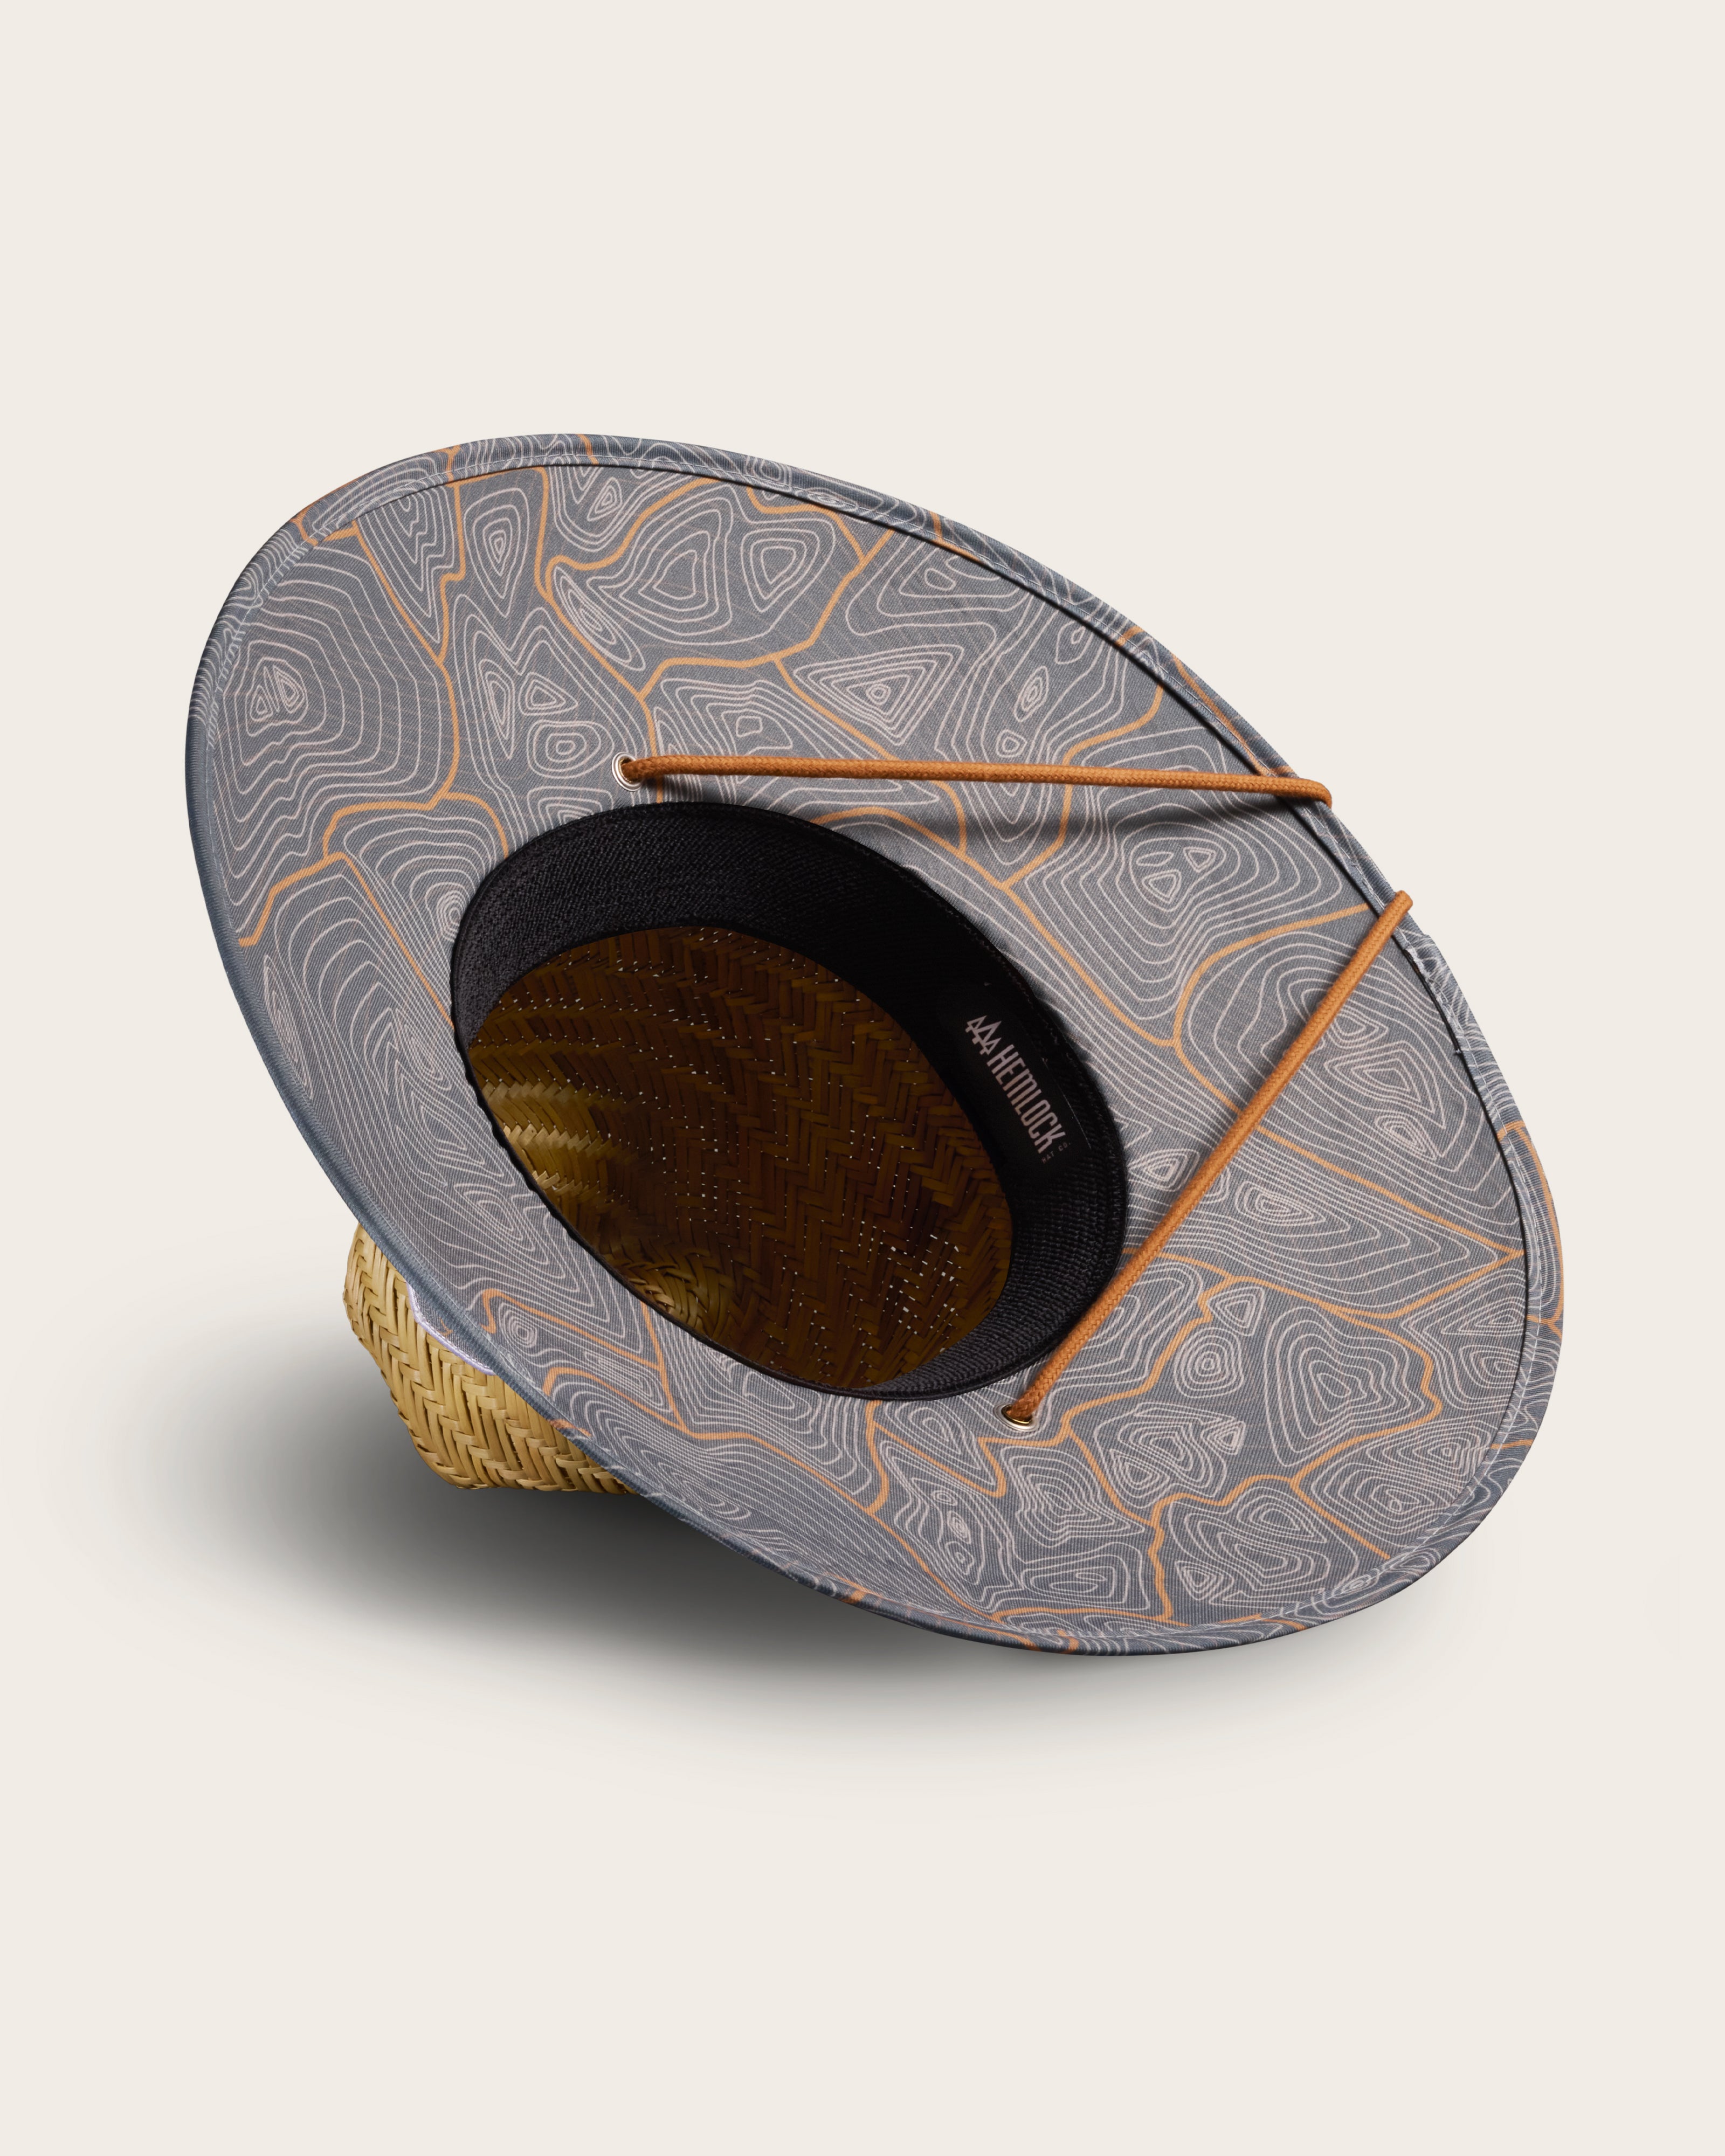 Hemlock Nomad straw lifeguard hat with topography pattern detailed view